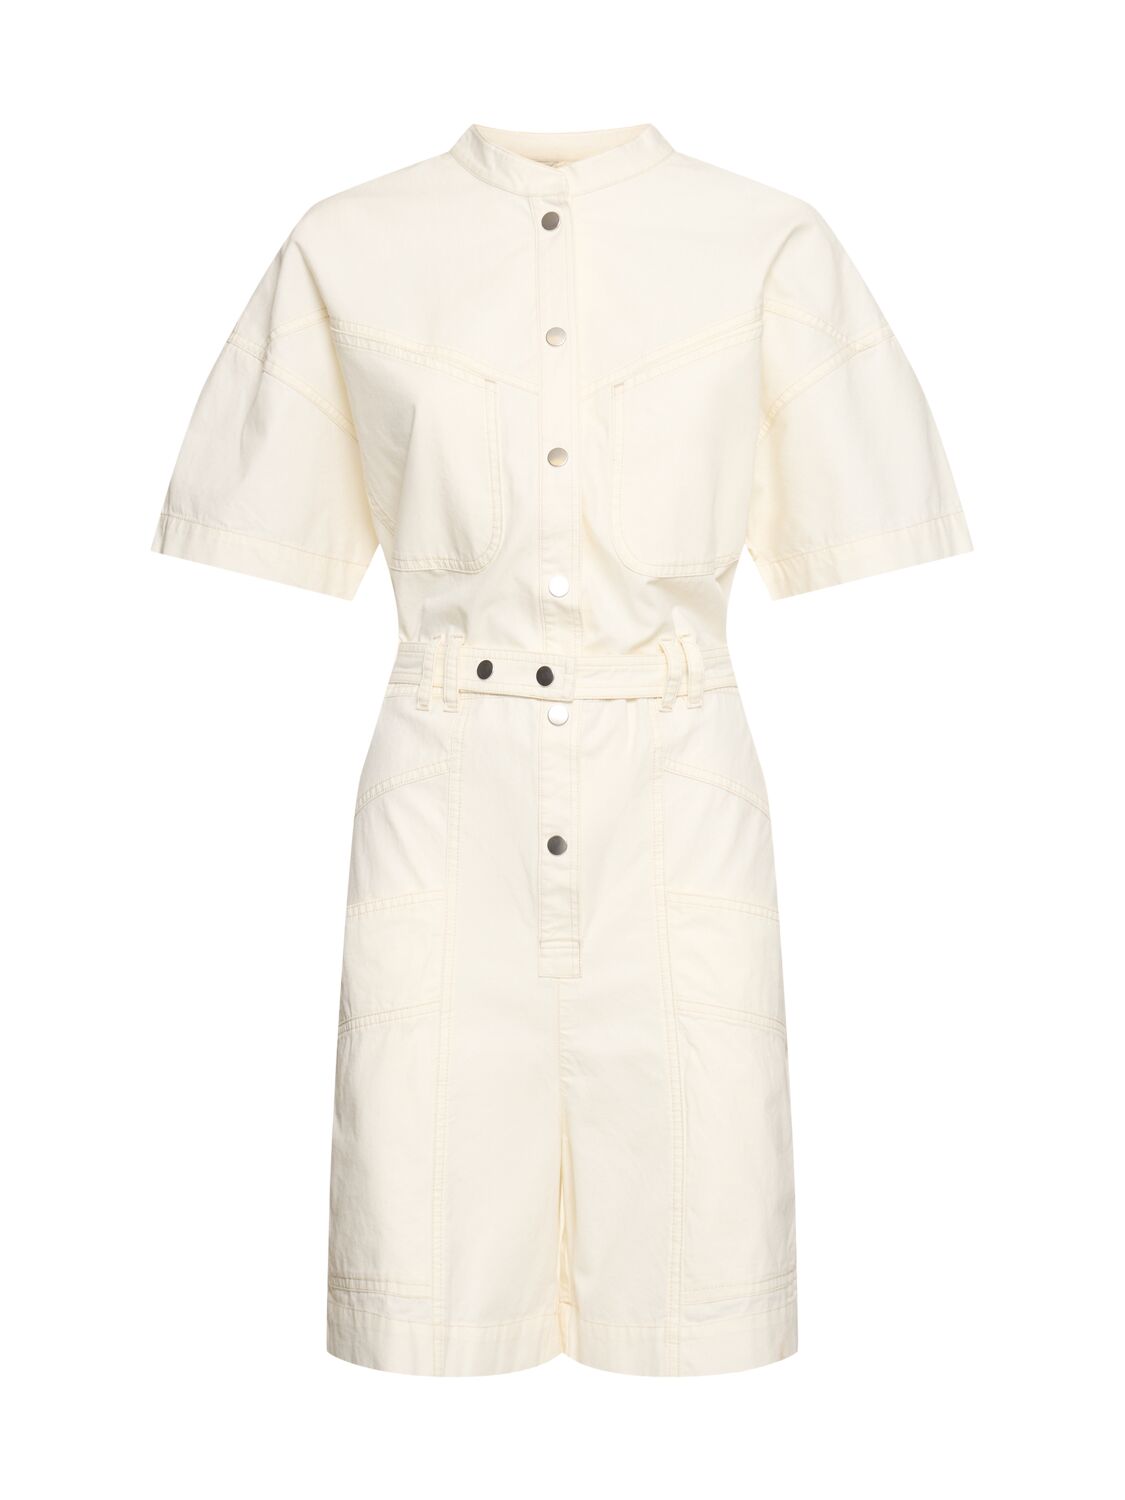 Image of Kiara Belted Cotton Overalls